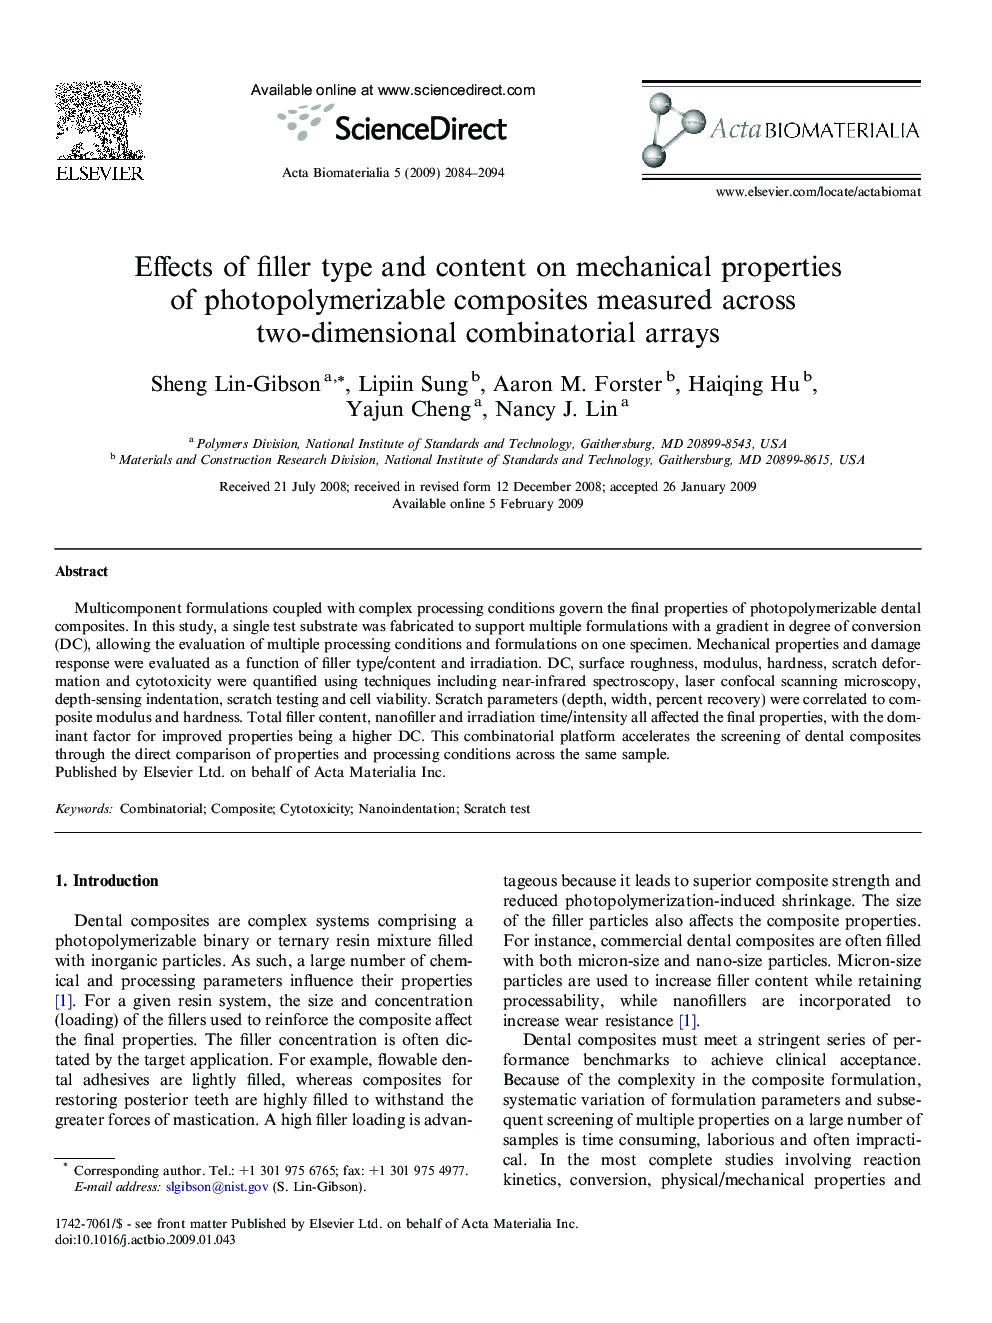 Effects of filler type and content on mechanical properties of photopolymerizable composites measured across two-dimensional combinatorial arrays